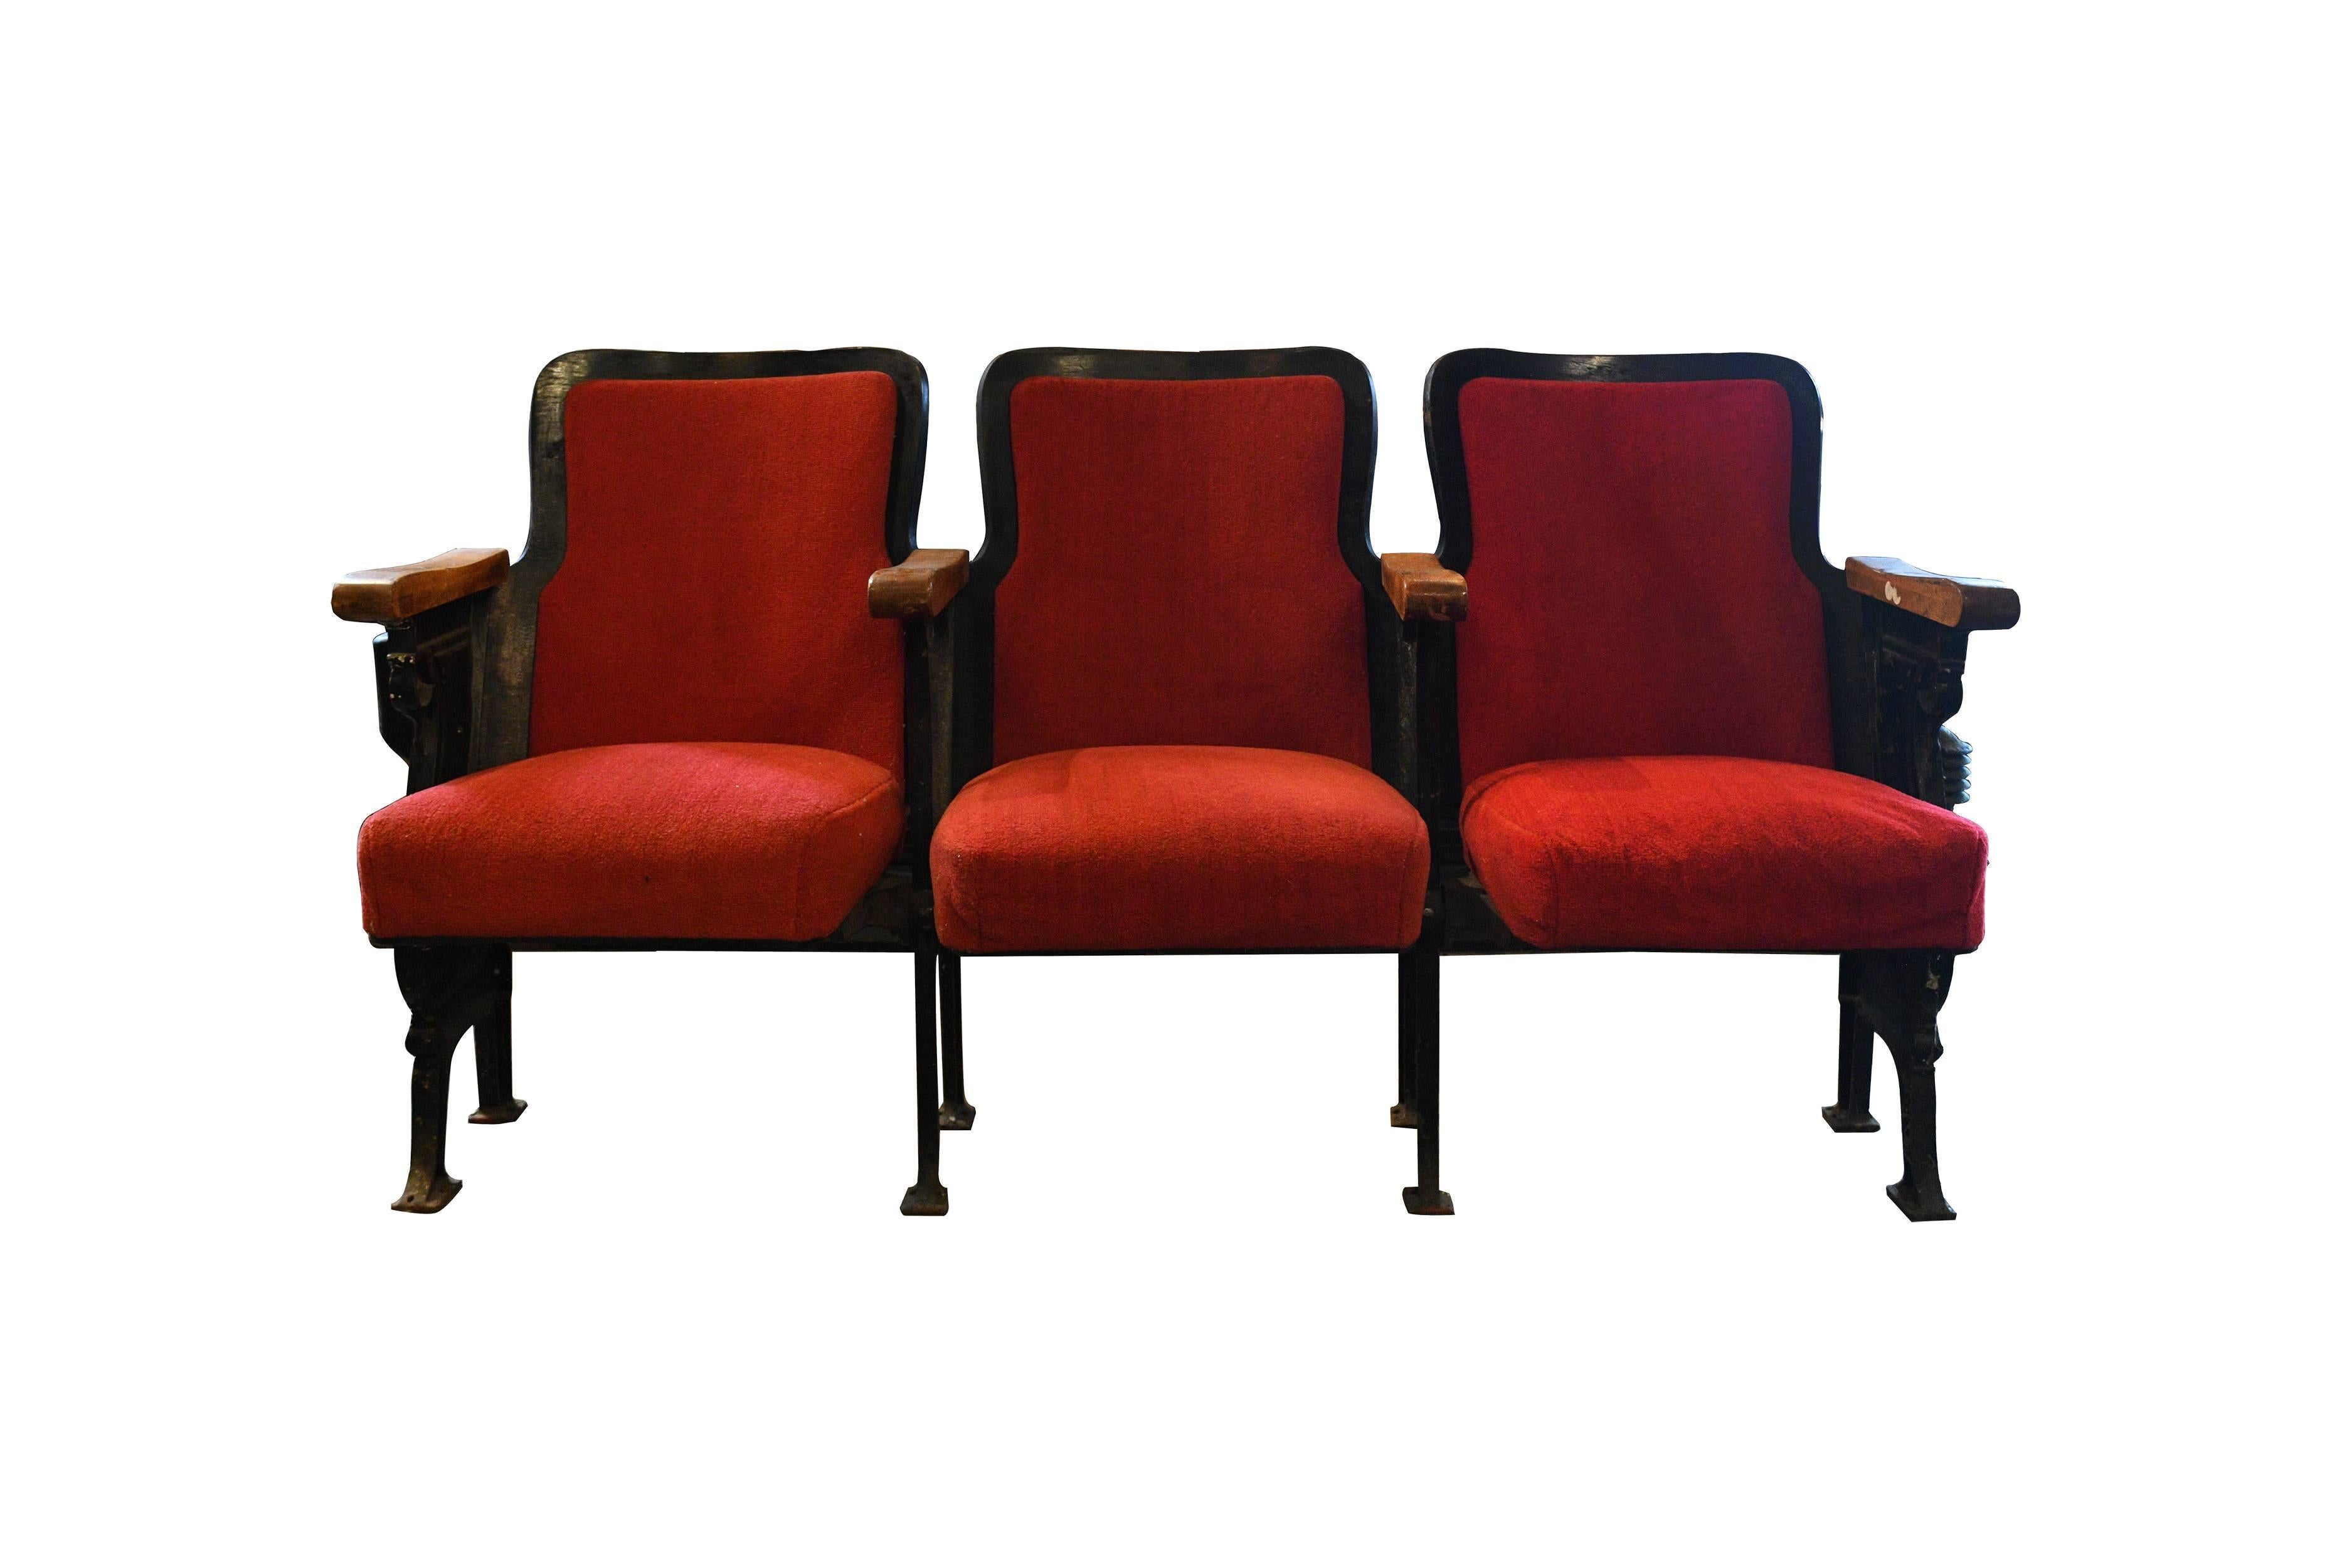 A set of three upholstered theater seats that are great for creative use in residential or commercial space. They are much more comfortable than traditional wood seating, while keeping their class and style. If you are intrigued by the classy and